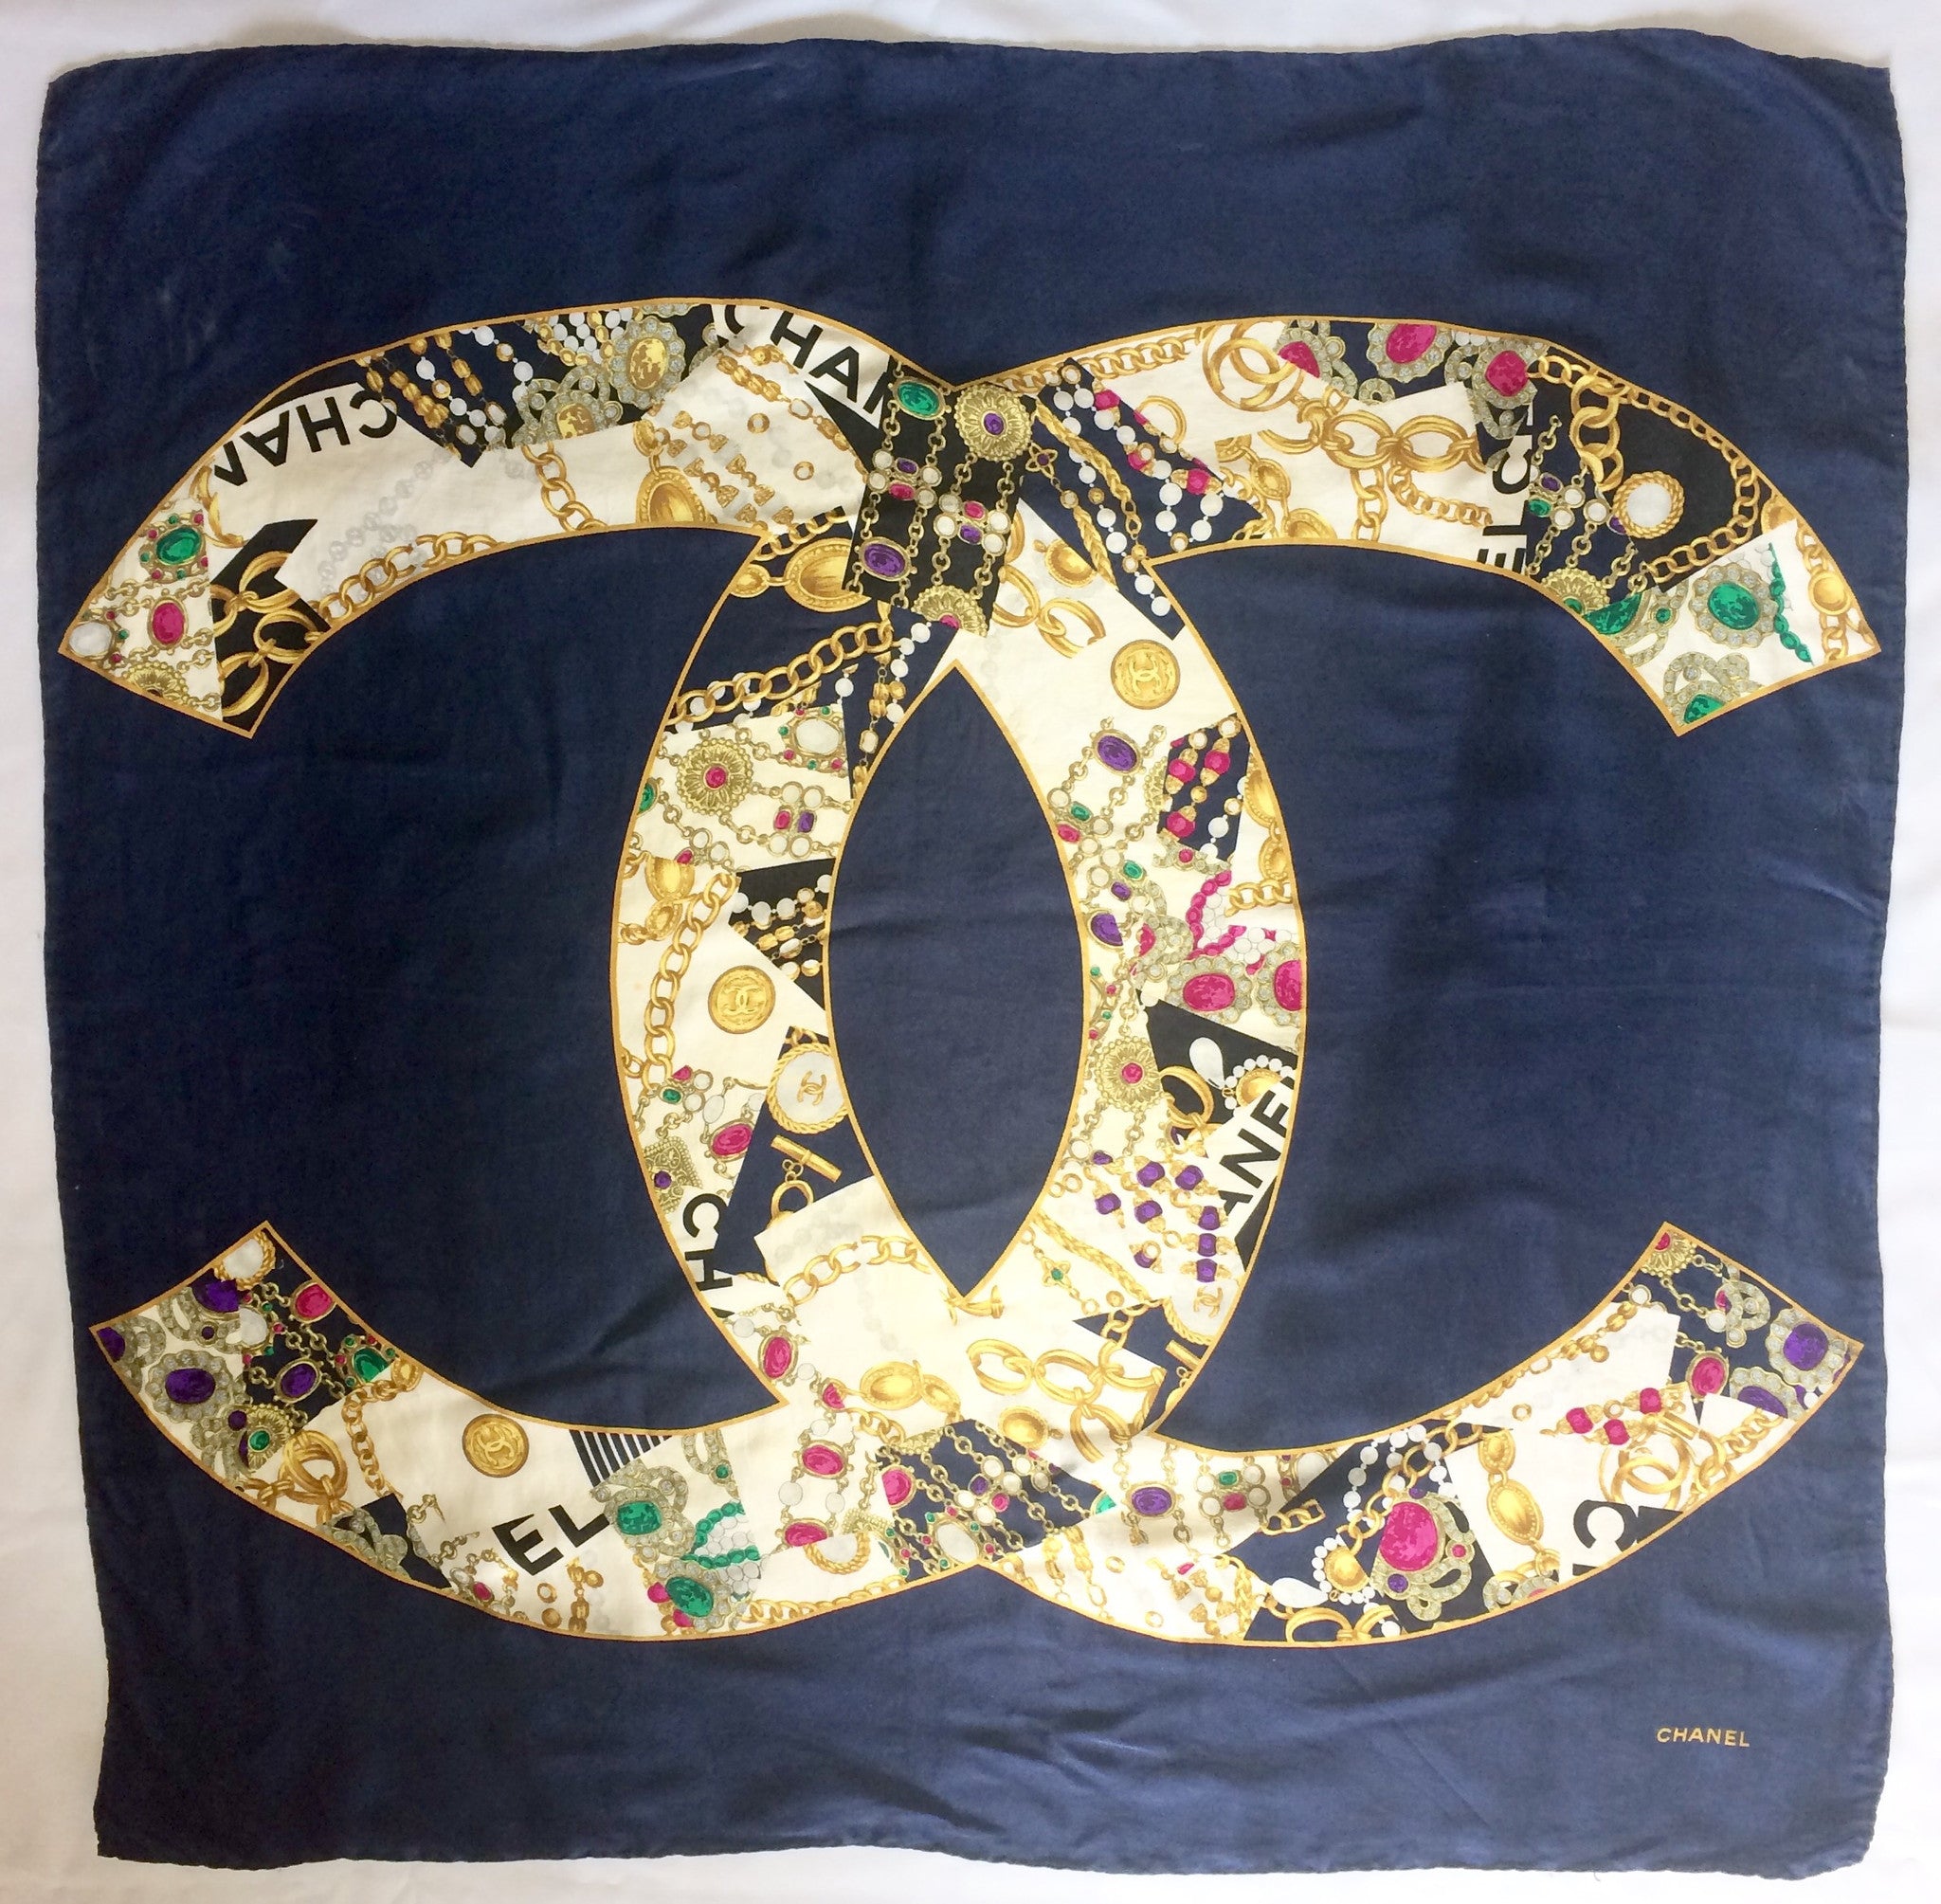 Vintage CHANEL large navy 100% silk scarf with gold, pink, ivory